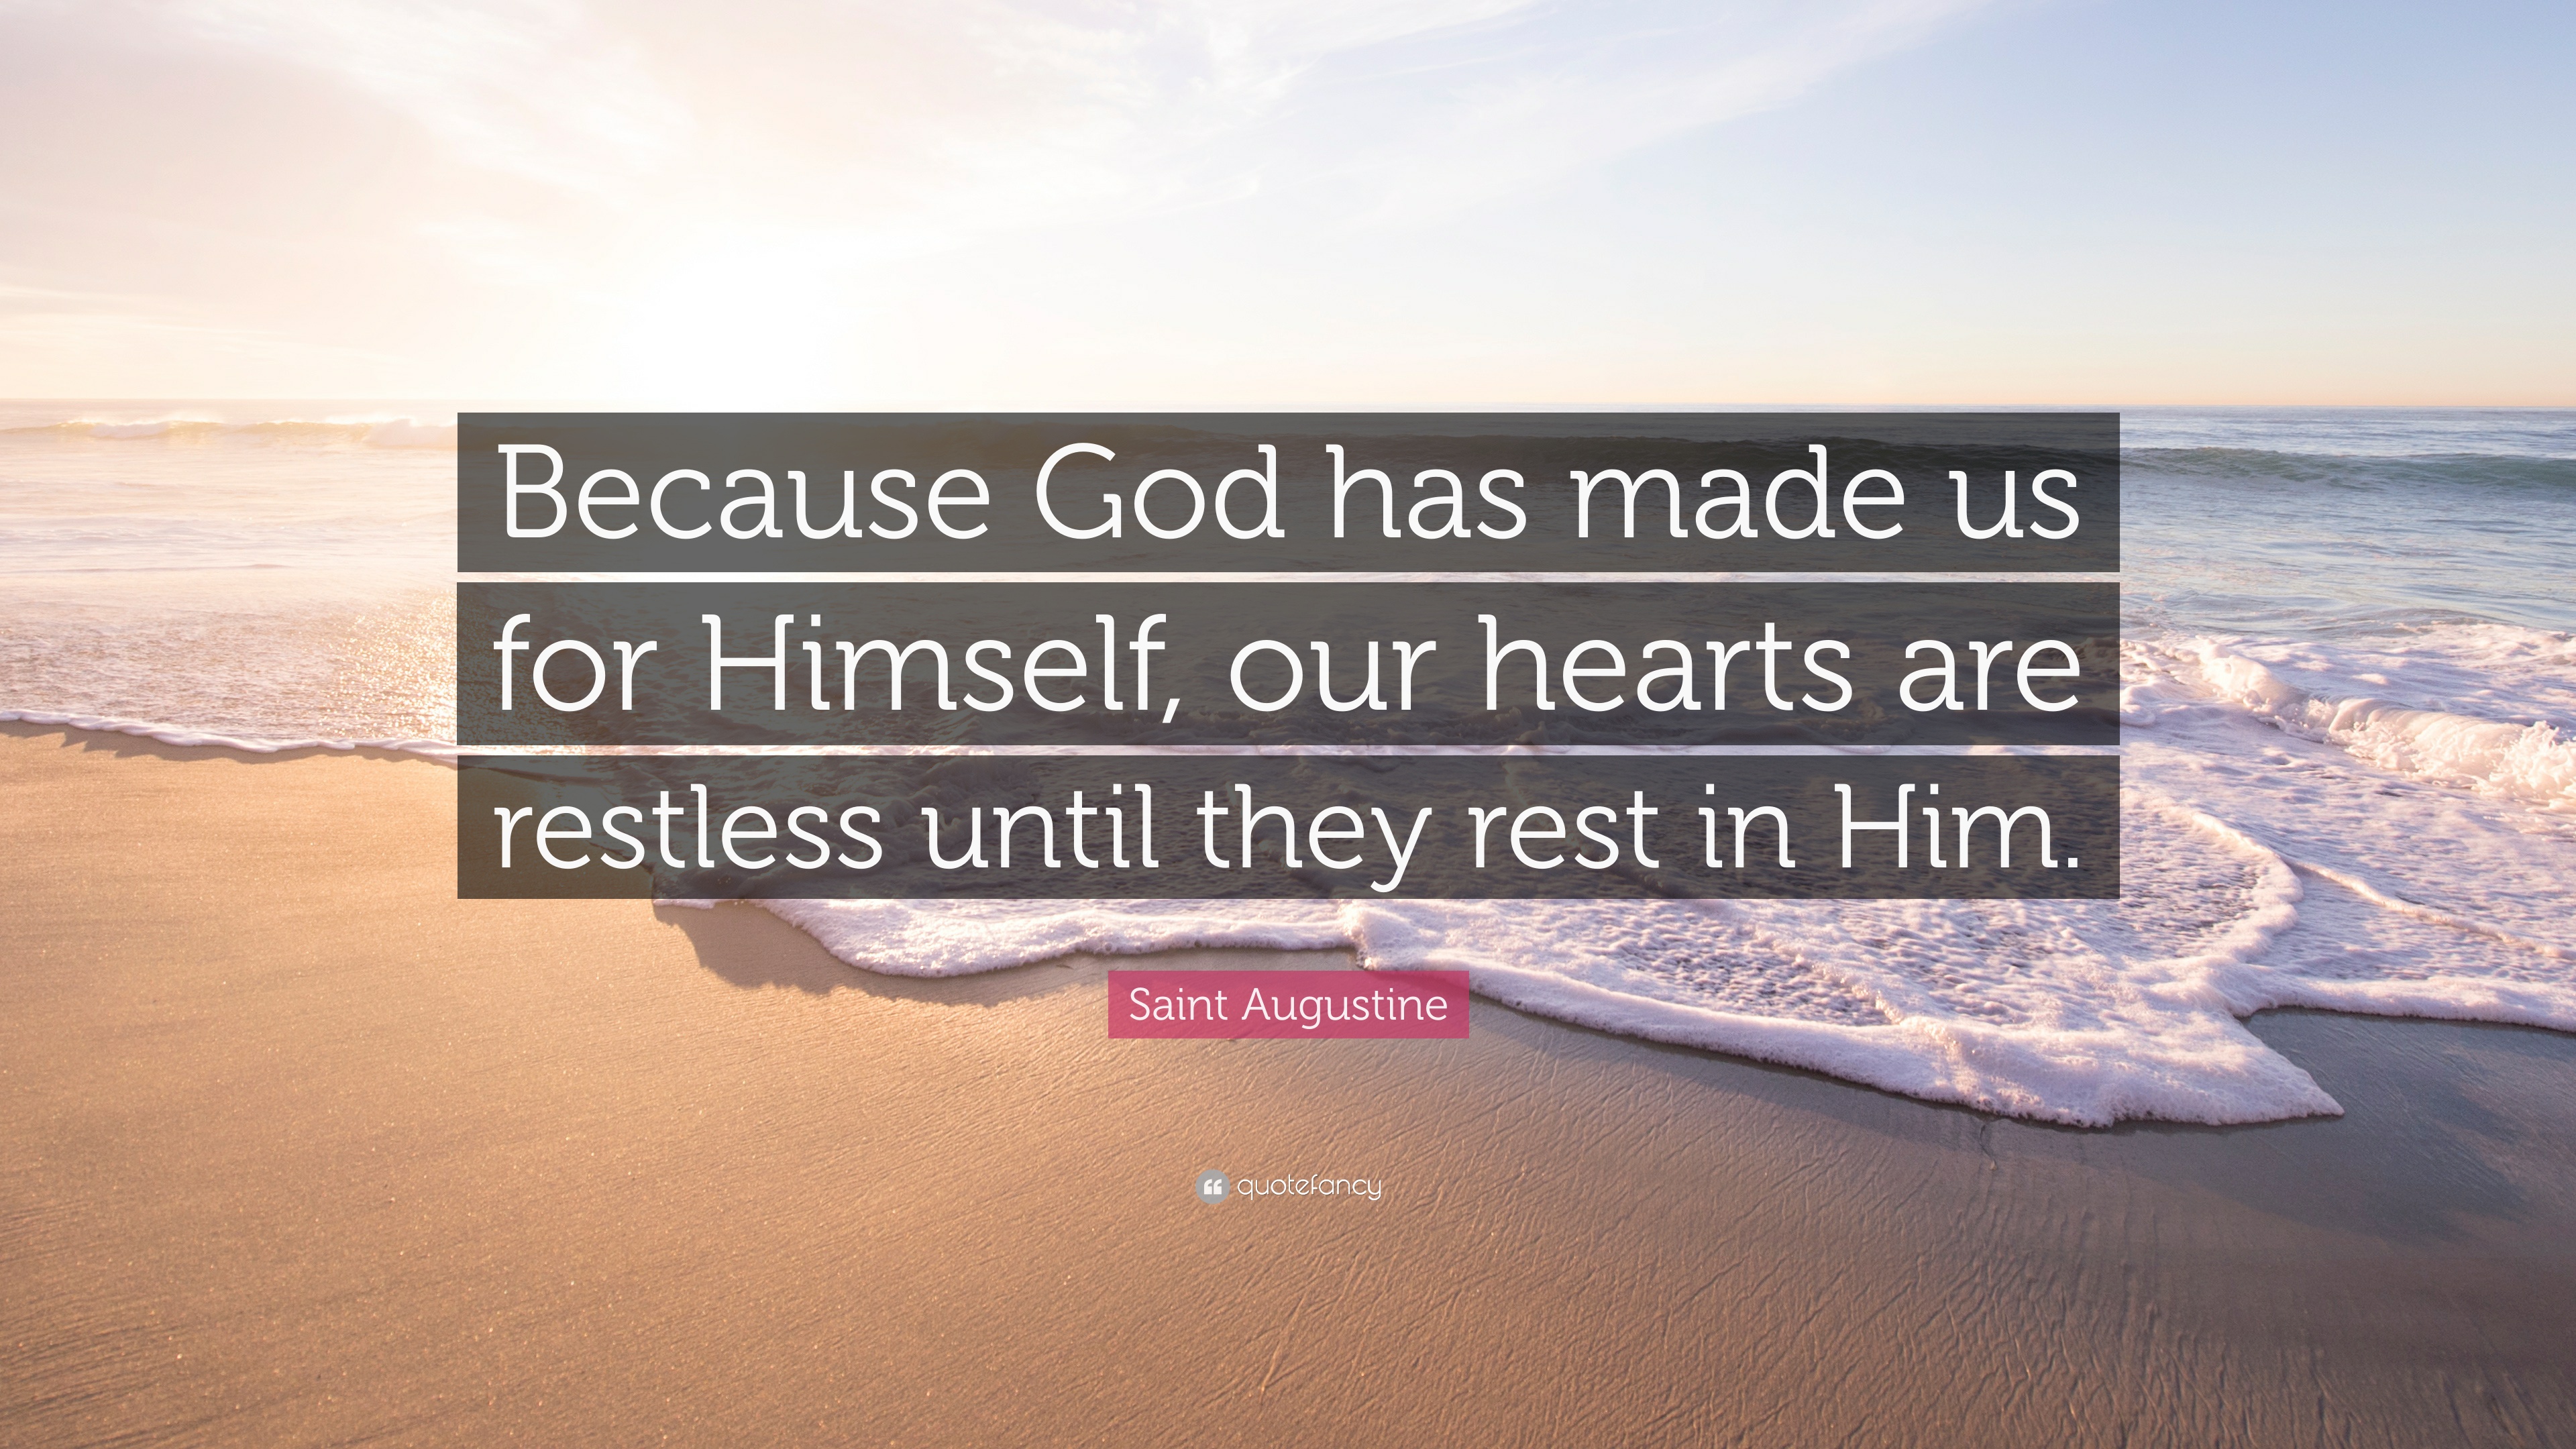 My heart was restless until I rest in Him. 